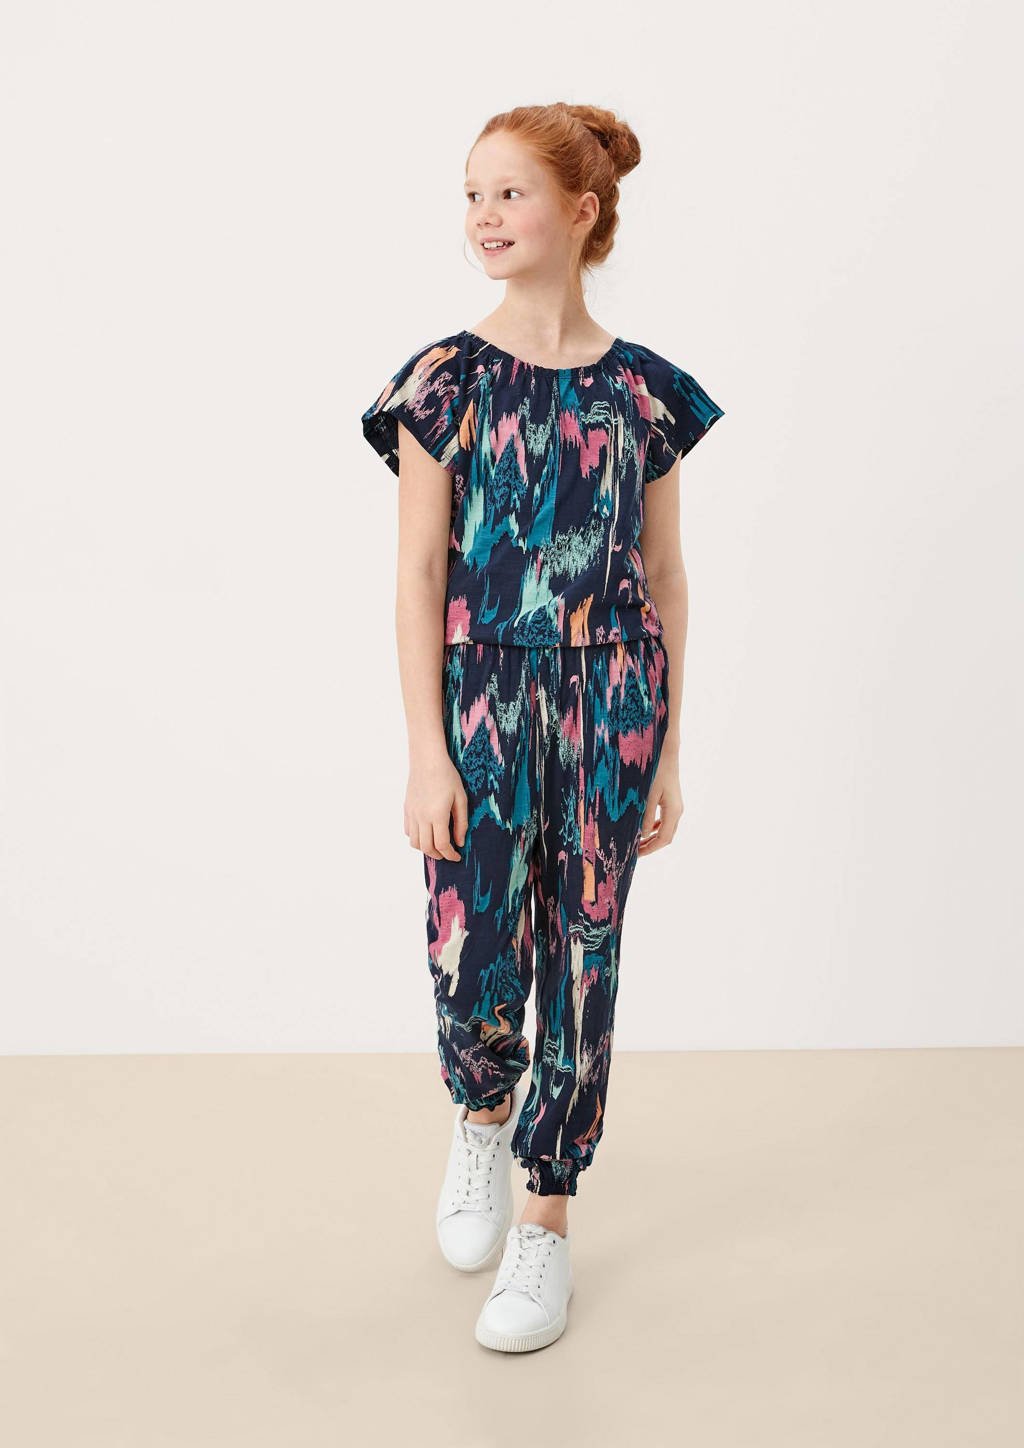 s.Oliver jumpsuit met all over print donkerblauw/roze/blauw/zalm